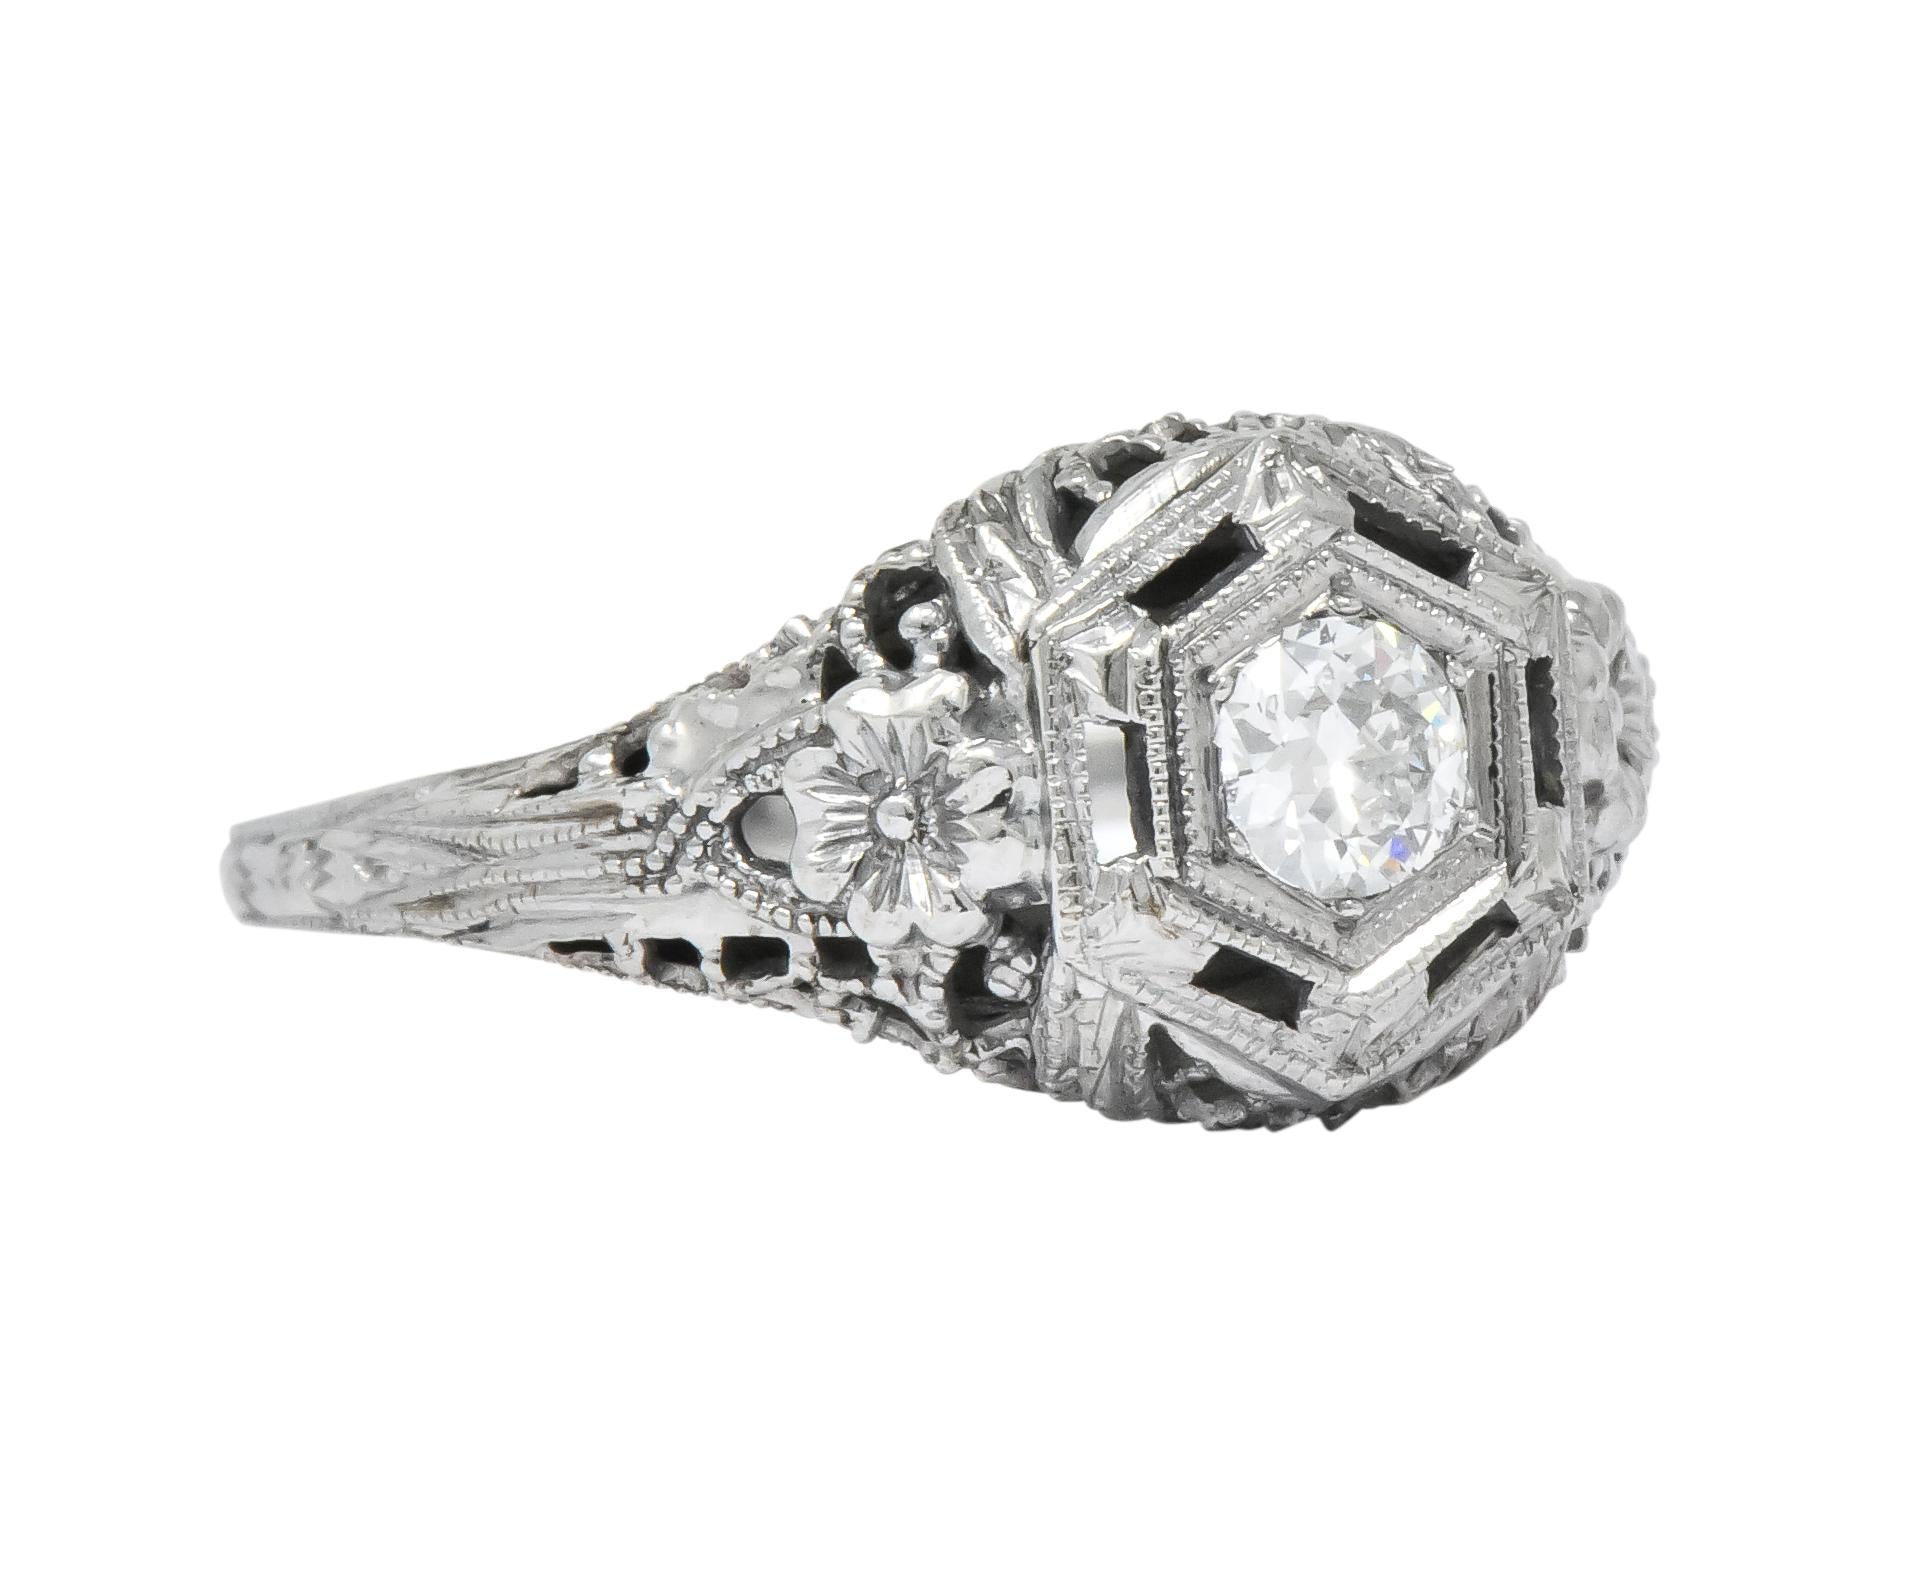 Centering an old European cut diamond weighing approximately 0.20 carat, H color and VS clarity

Bead set in a hexagonal pierced mount

With floral and millegrain details and fully engraved shank

Stamped 18K

Ring Size: 5 3/4 & Sizable (please